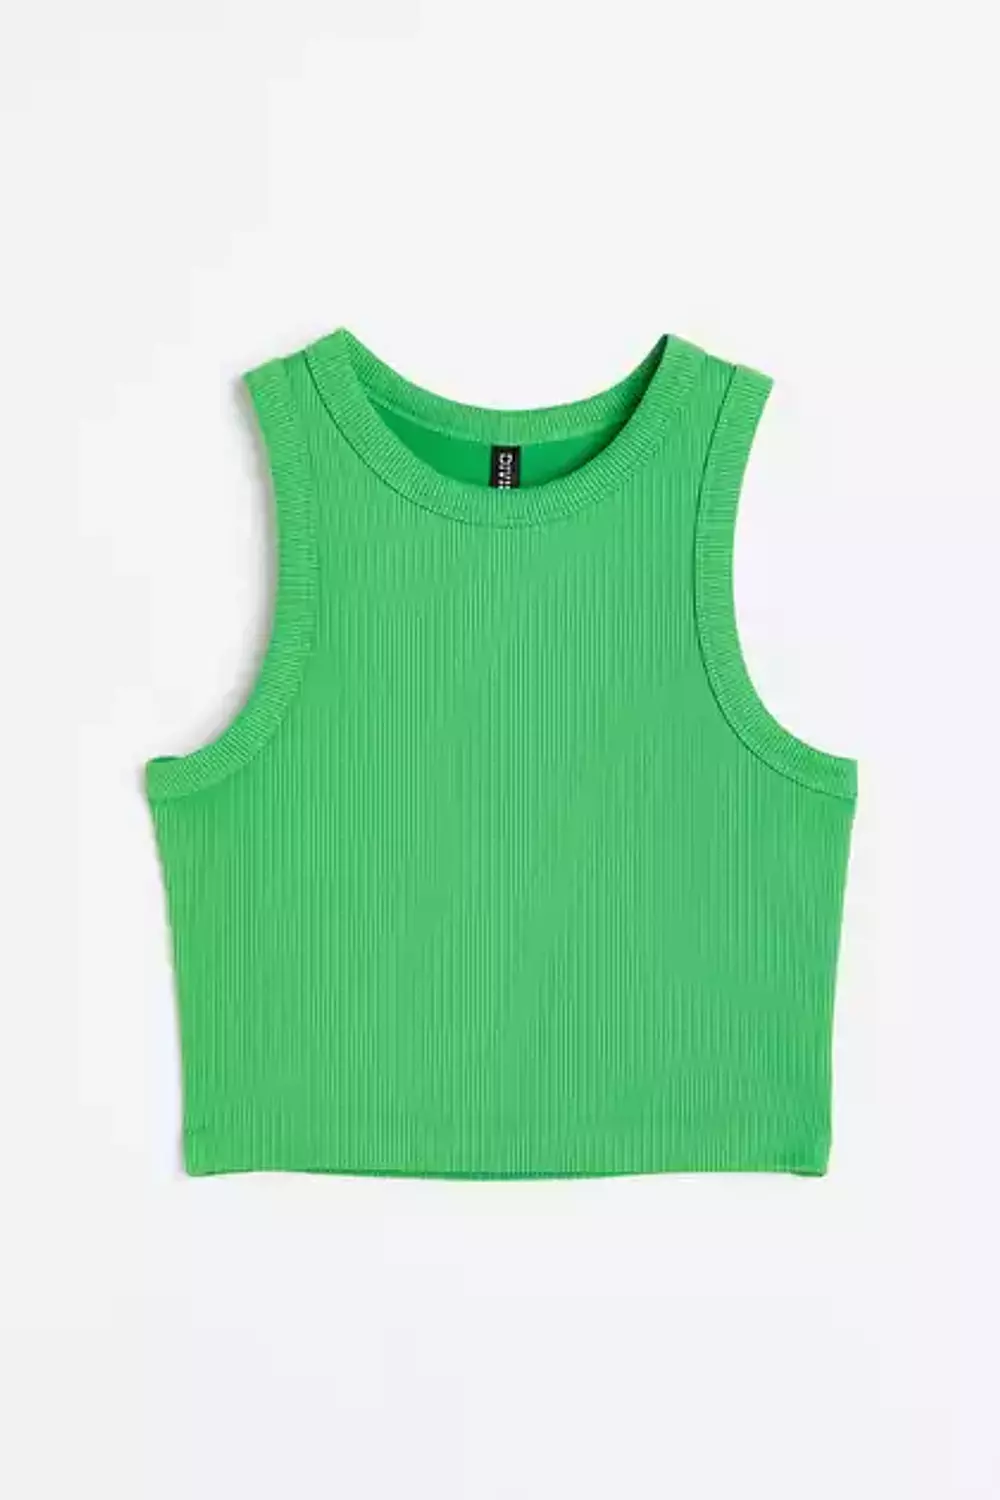 Green Tank Top hover image